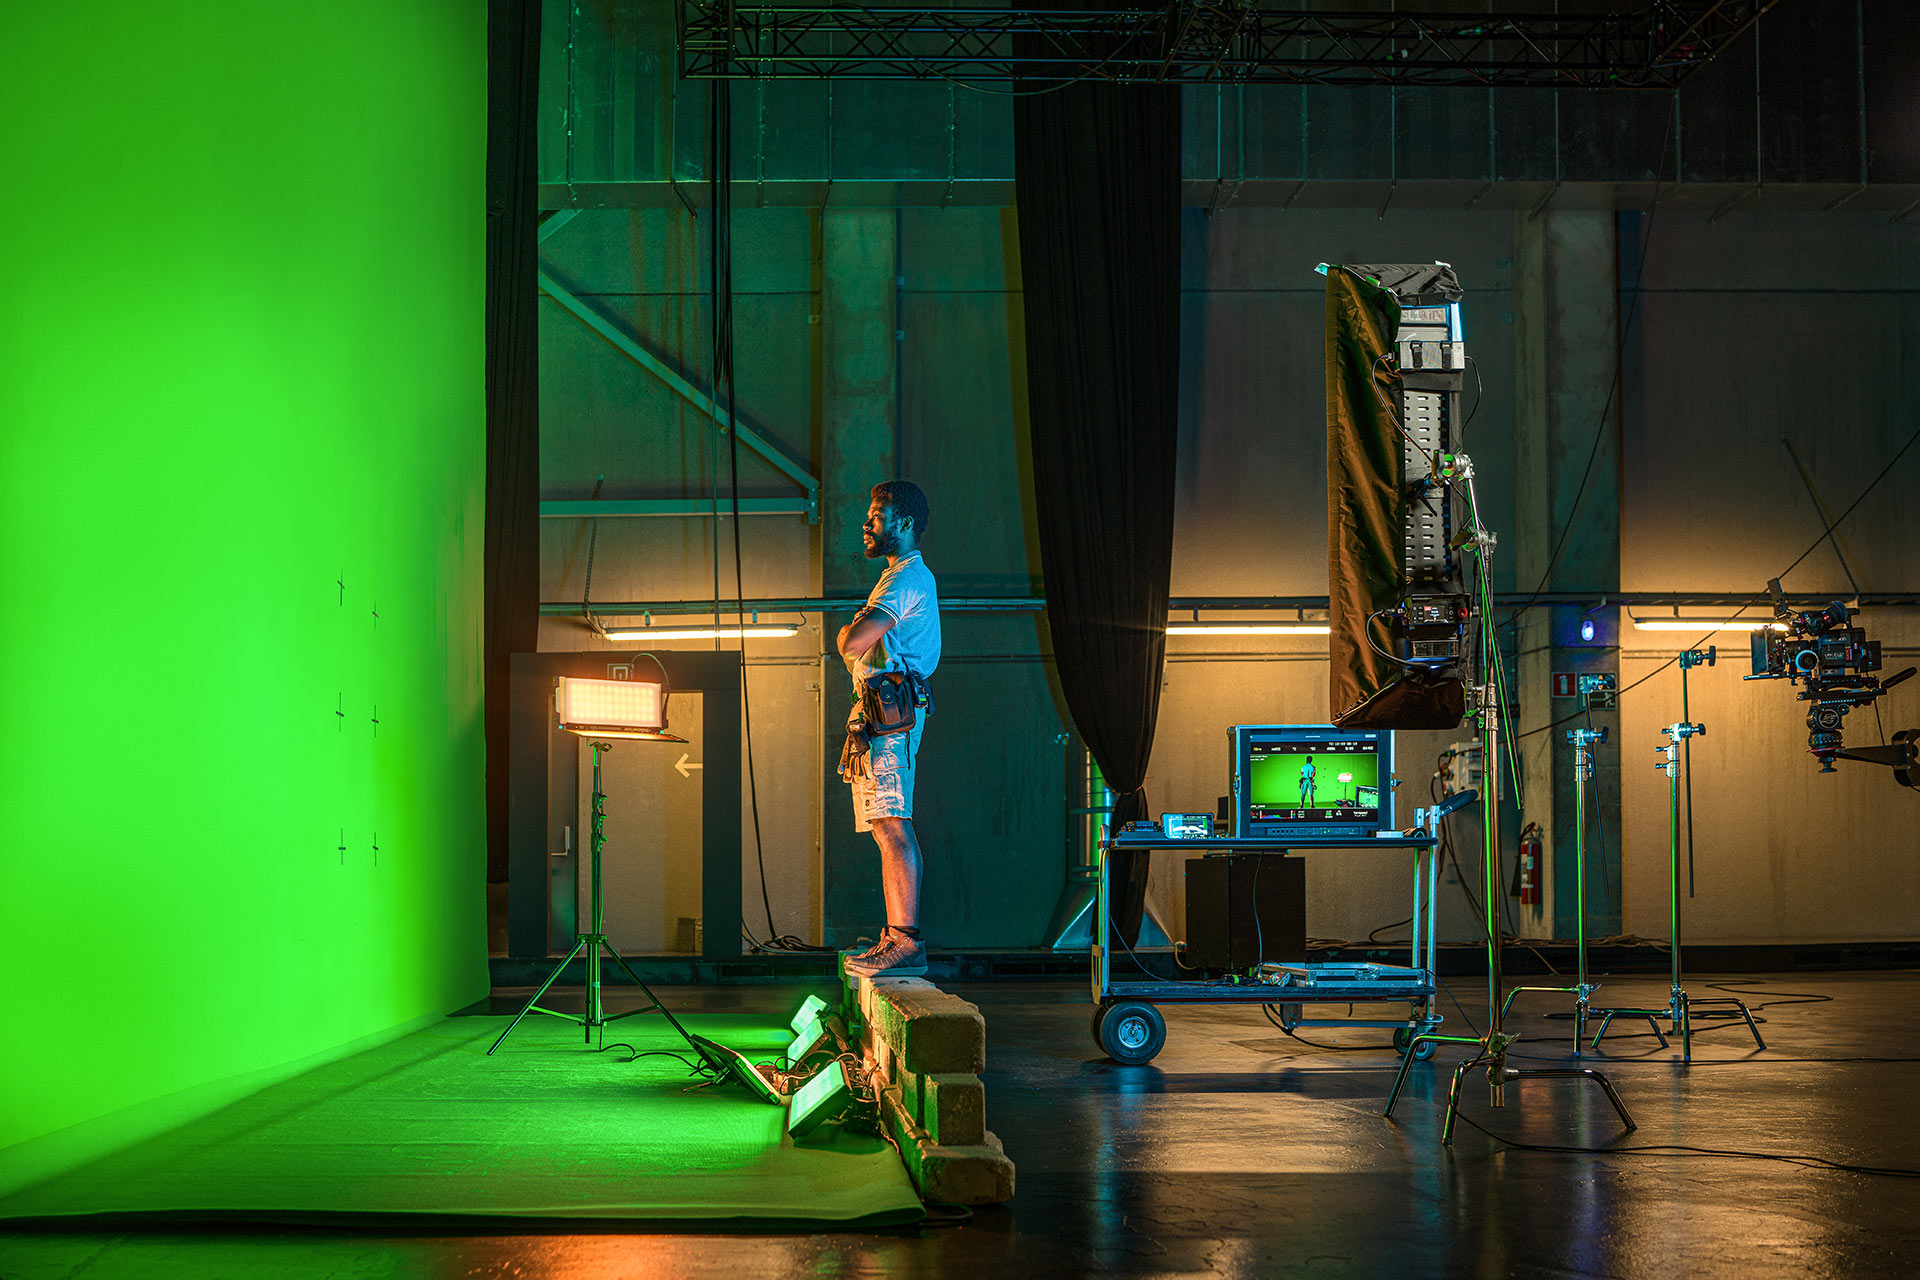 DMG L Mix lighting system, designed and manufactured by Rosco in Villeurbanne, rigged indoors with a studio green screen